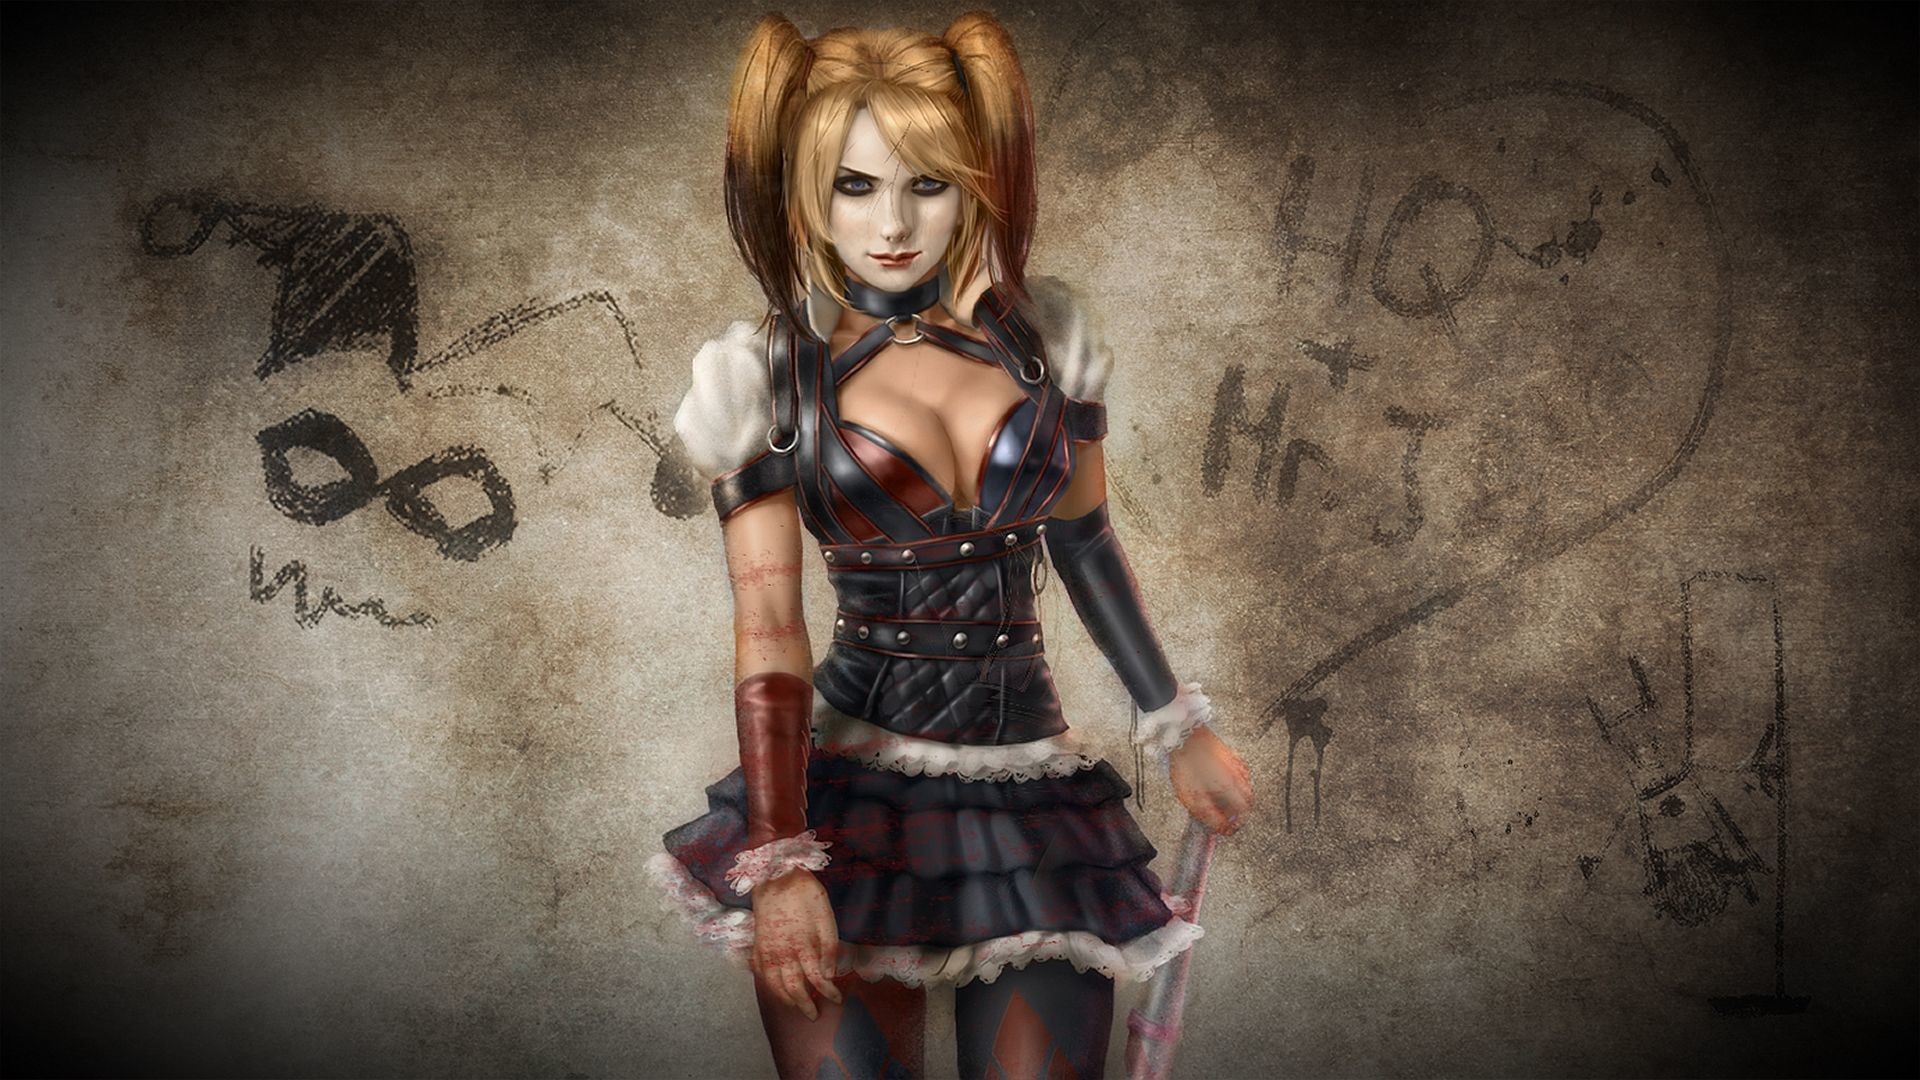 1920x1080 240 Harley Quinn HD Wallpapers | Backgrounds - Wallpaper Abyss